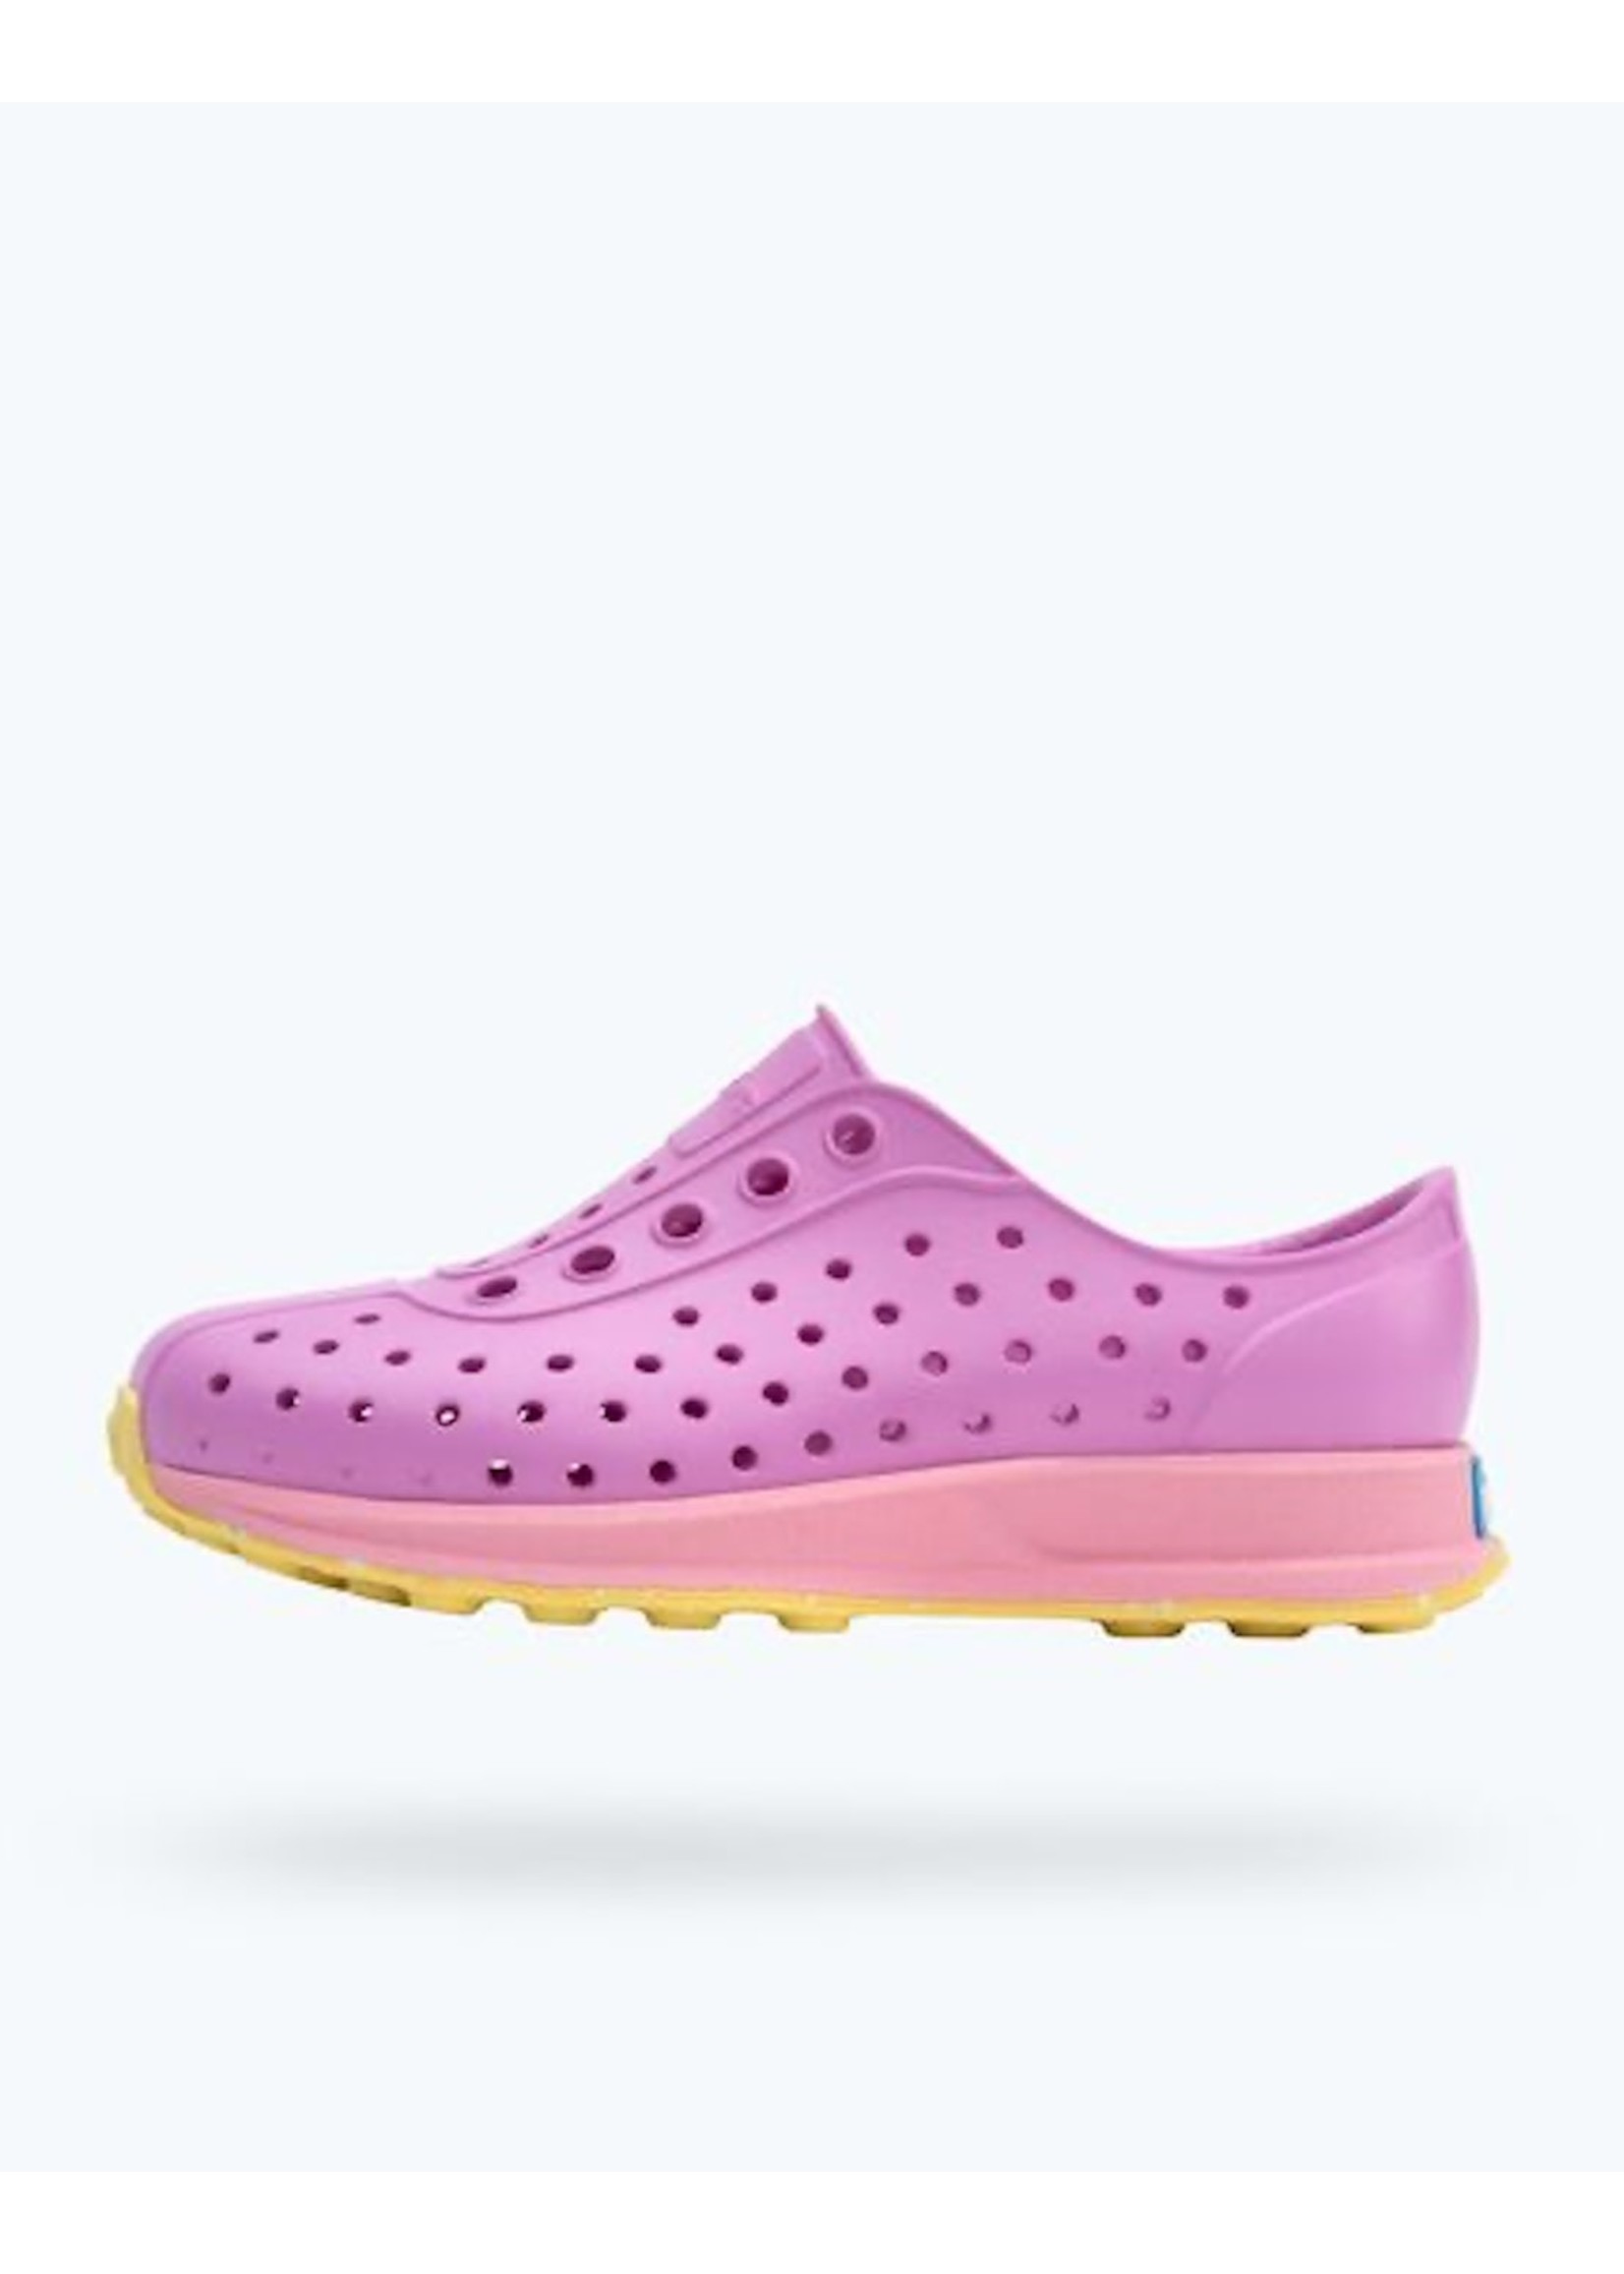 Native Shoes Native Shoes, Robbie Sugarlite™ Youth / Junior || Winterberry Pink/ Princess Pink/ Morning Speckle Rubber